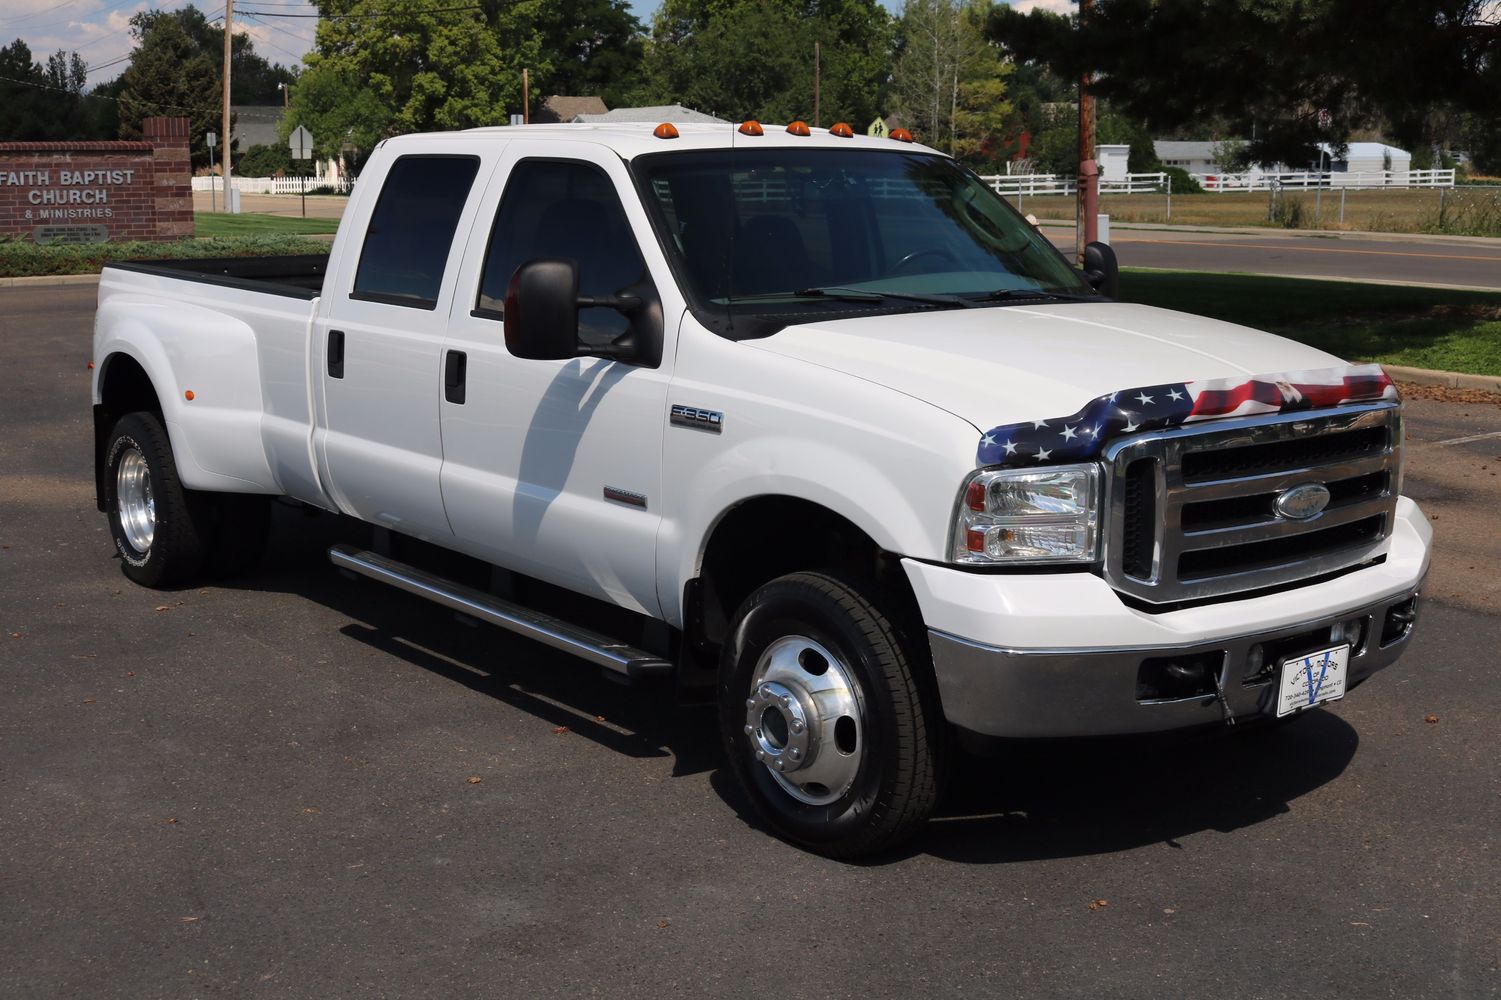 2006 Ford F-350 Super Duty Lariat Crew Cab Dually LB | Victory Motors 2006 Ford F350 Lariat Diesel Towing Capacity